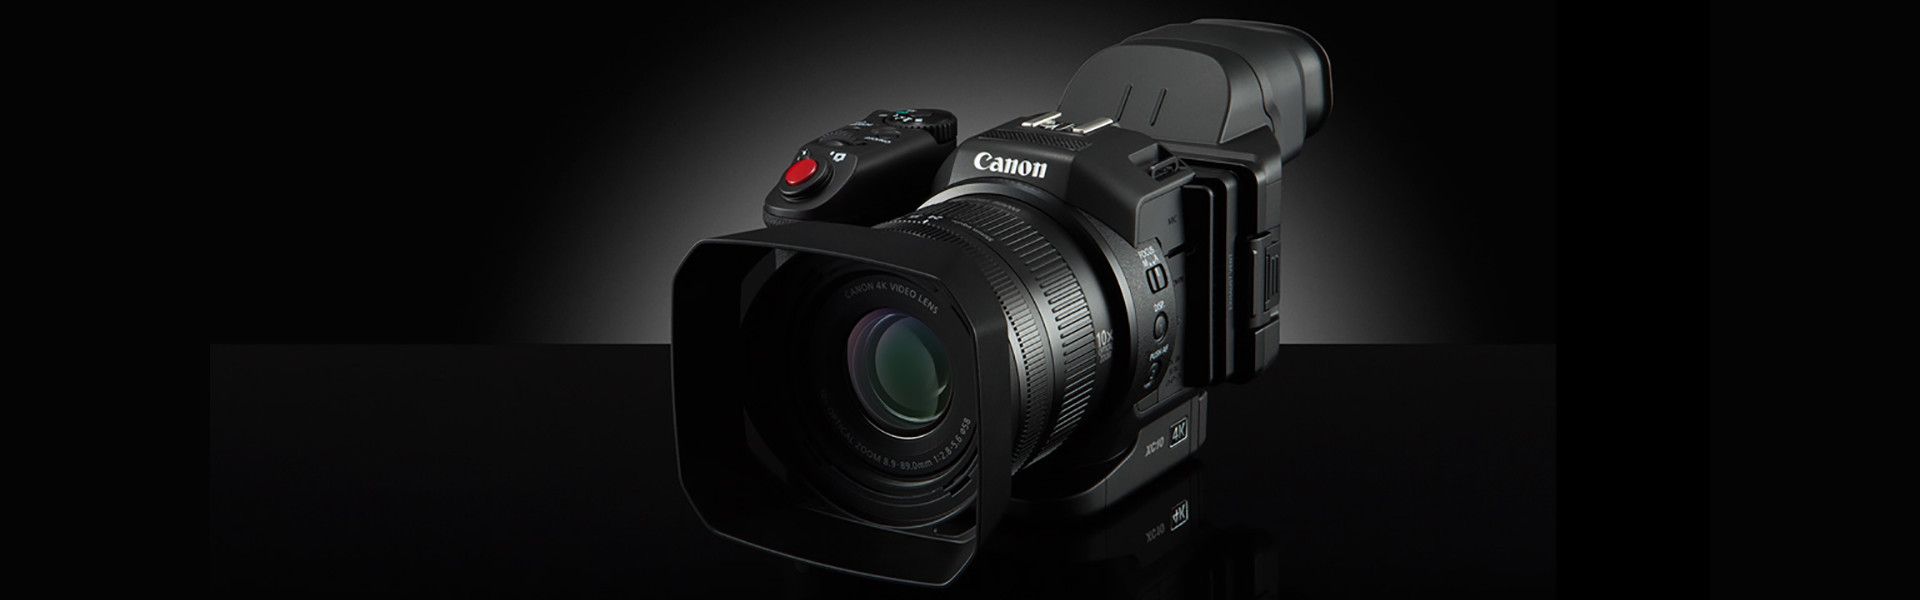 Header image for article Capturing Stills and Video with the Canon XC10